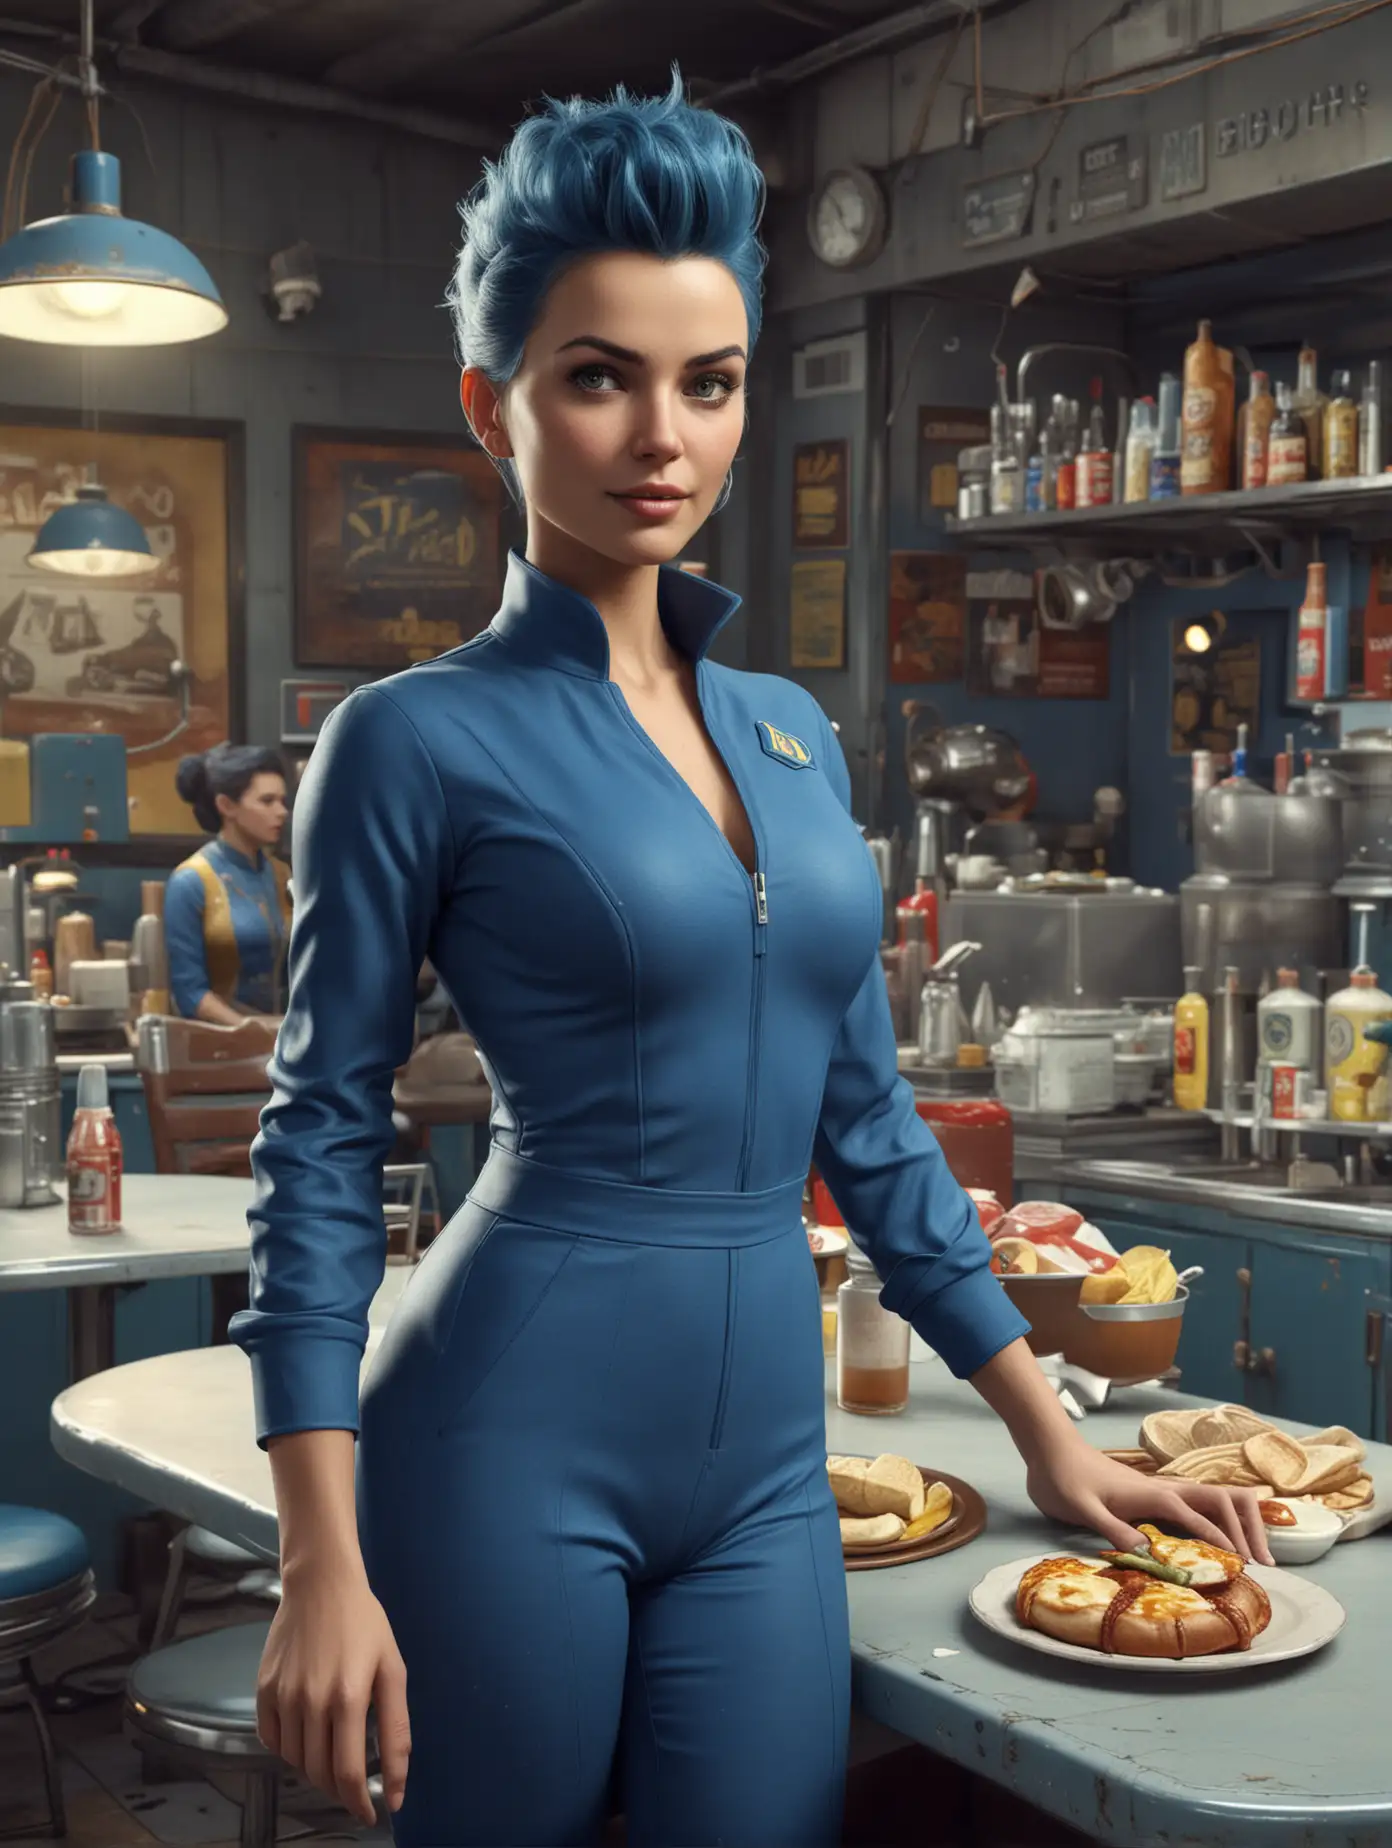 Vault dweller woman from Fallout, wearing tight blue jumpsuit, making food in a diner, atomic era style of fashion hairstyles, interiors and decor, Mr. Handy robot,

highly detailed, random details, imperfection, detailed body, detailed skin textures, skin pores, detailed colours hues tones patterns,